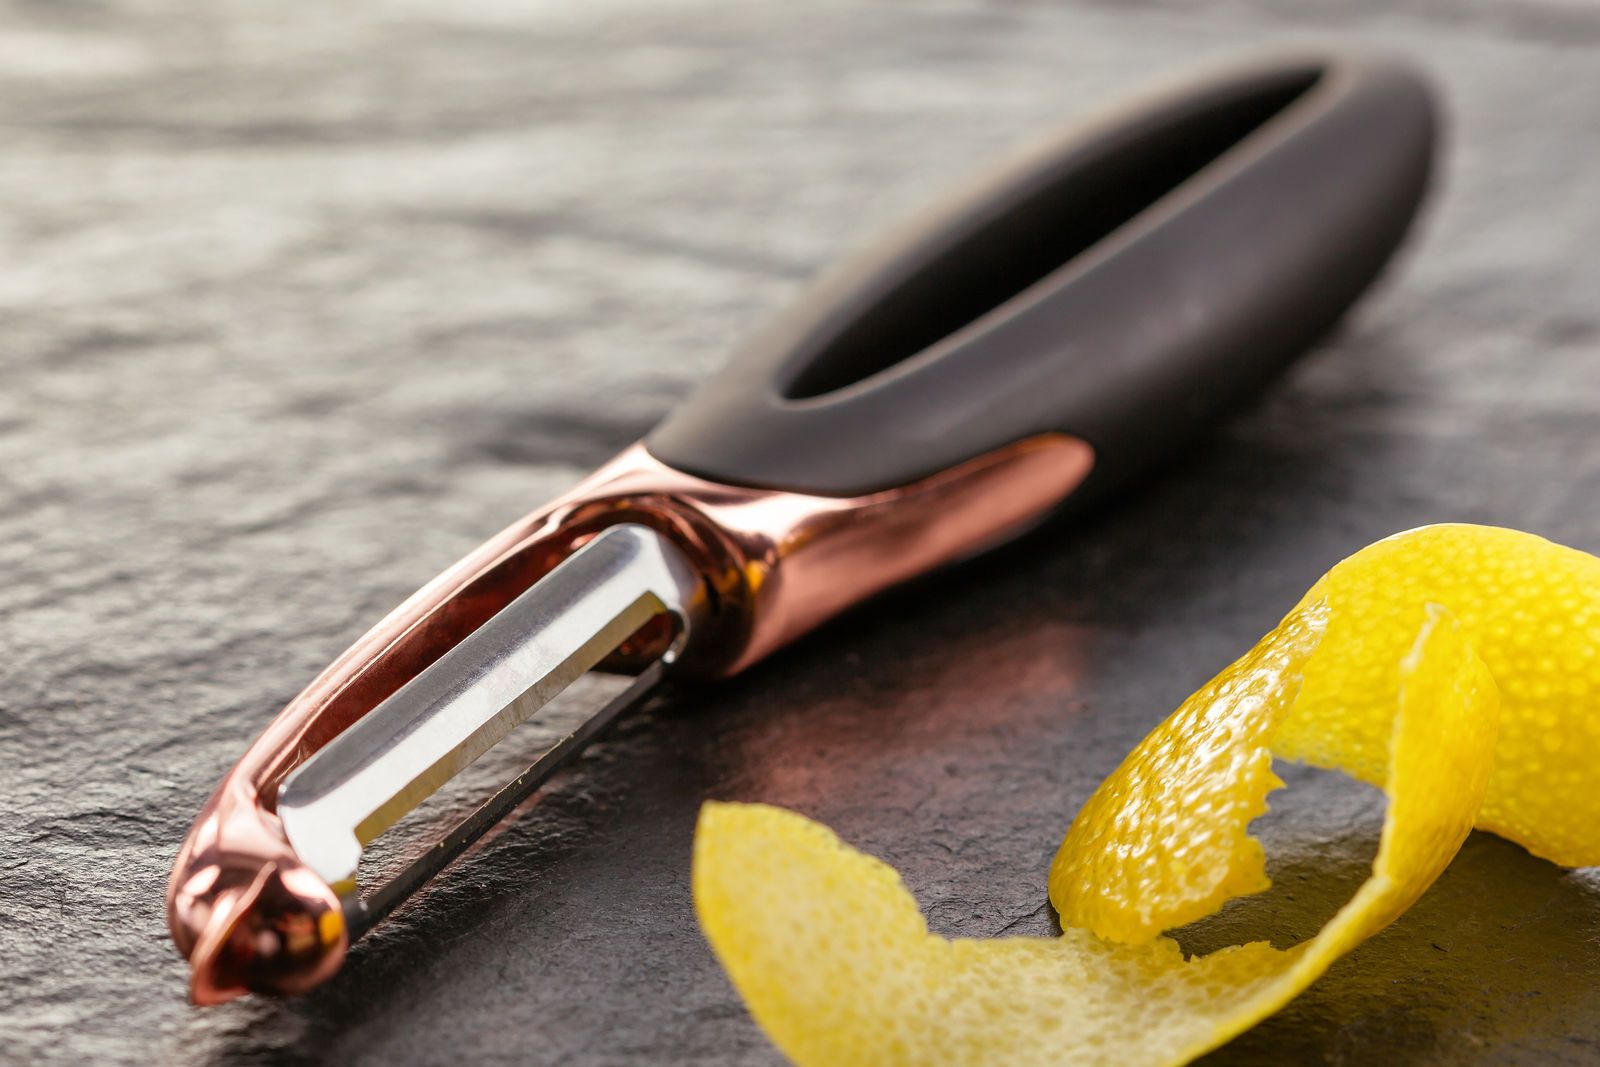 Stellar Soft Touch Copper Peeler Kitchen & Home Cooking Dining Utensils